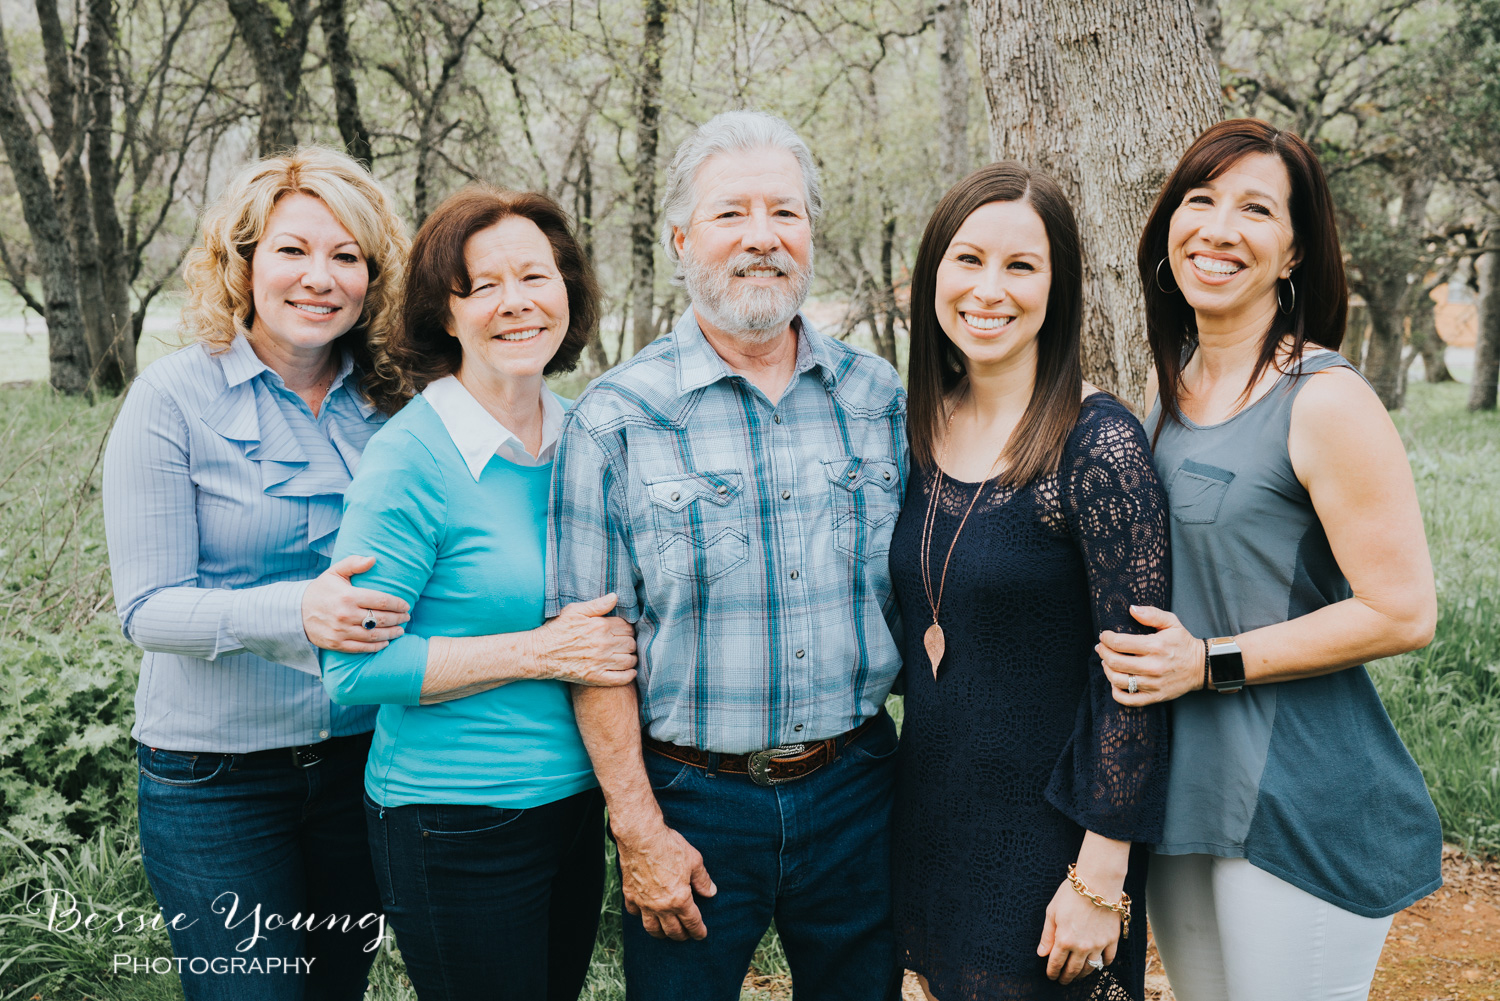 Outdoor Extended Family by the River - Style Life Photography, ltd